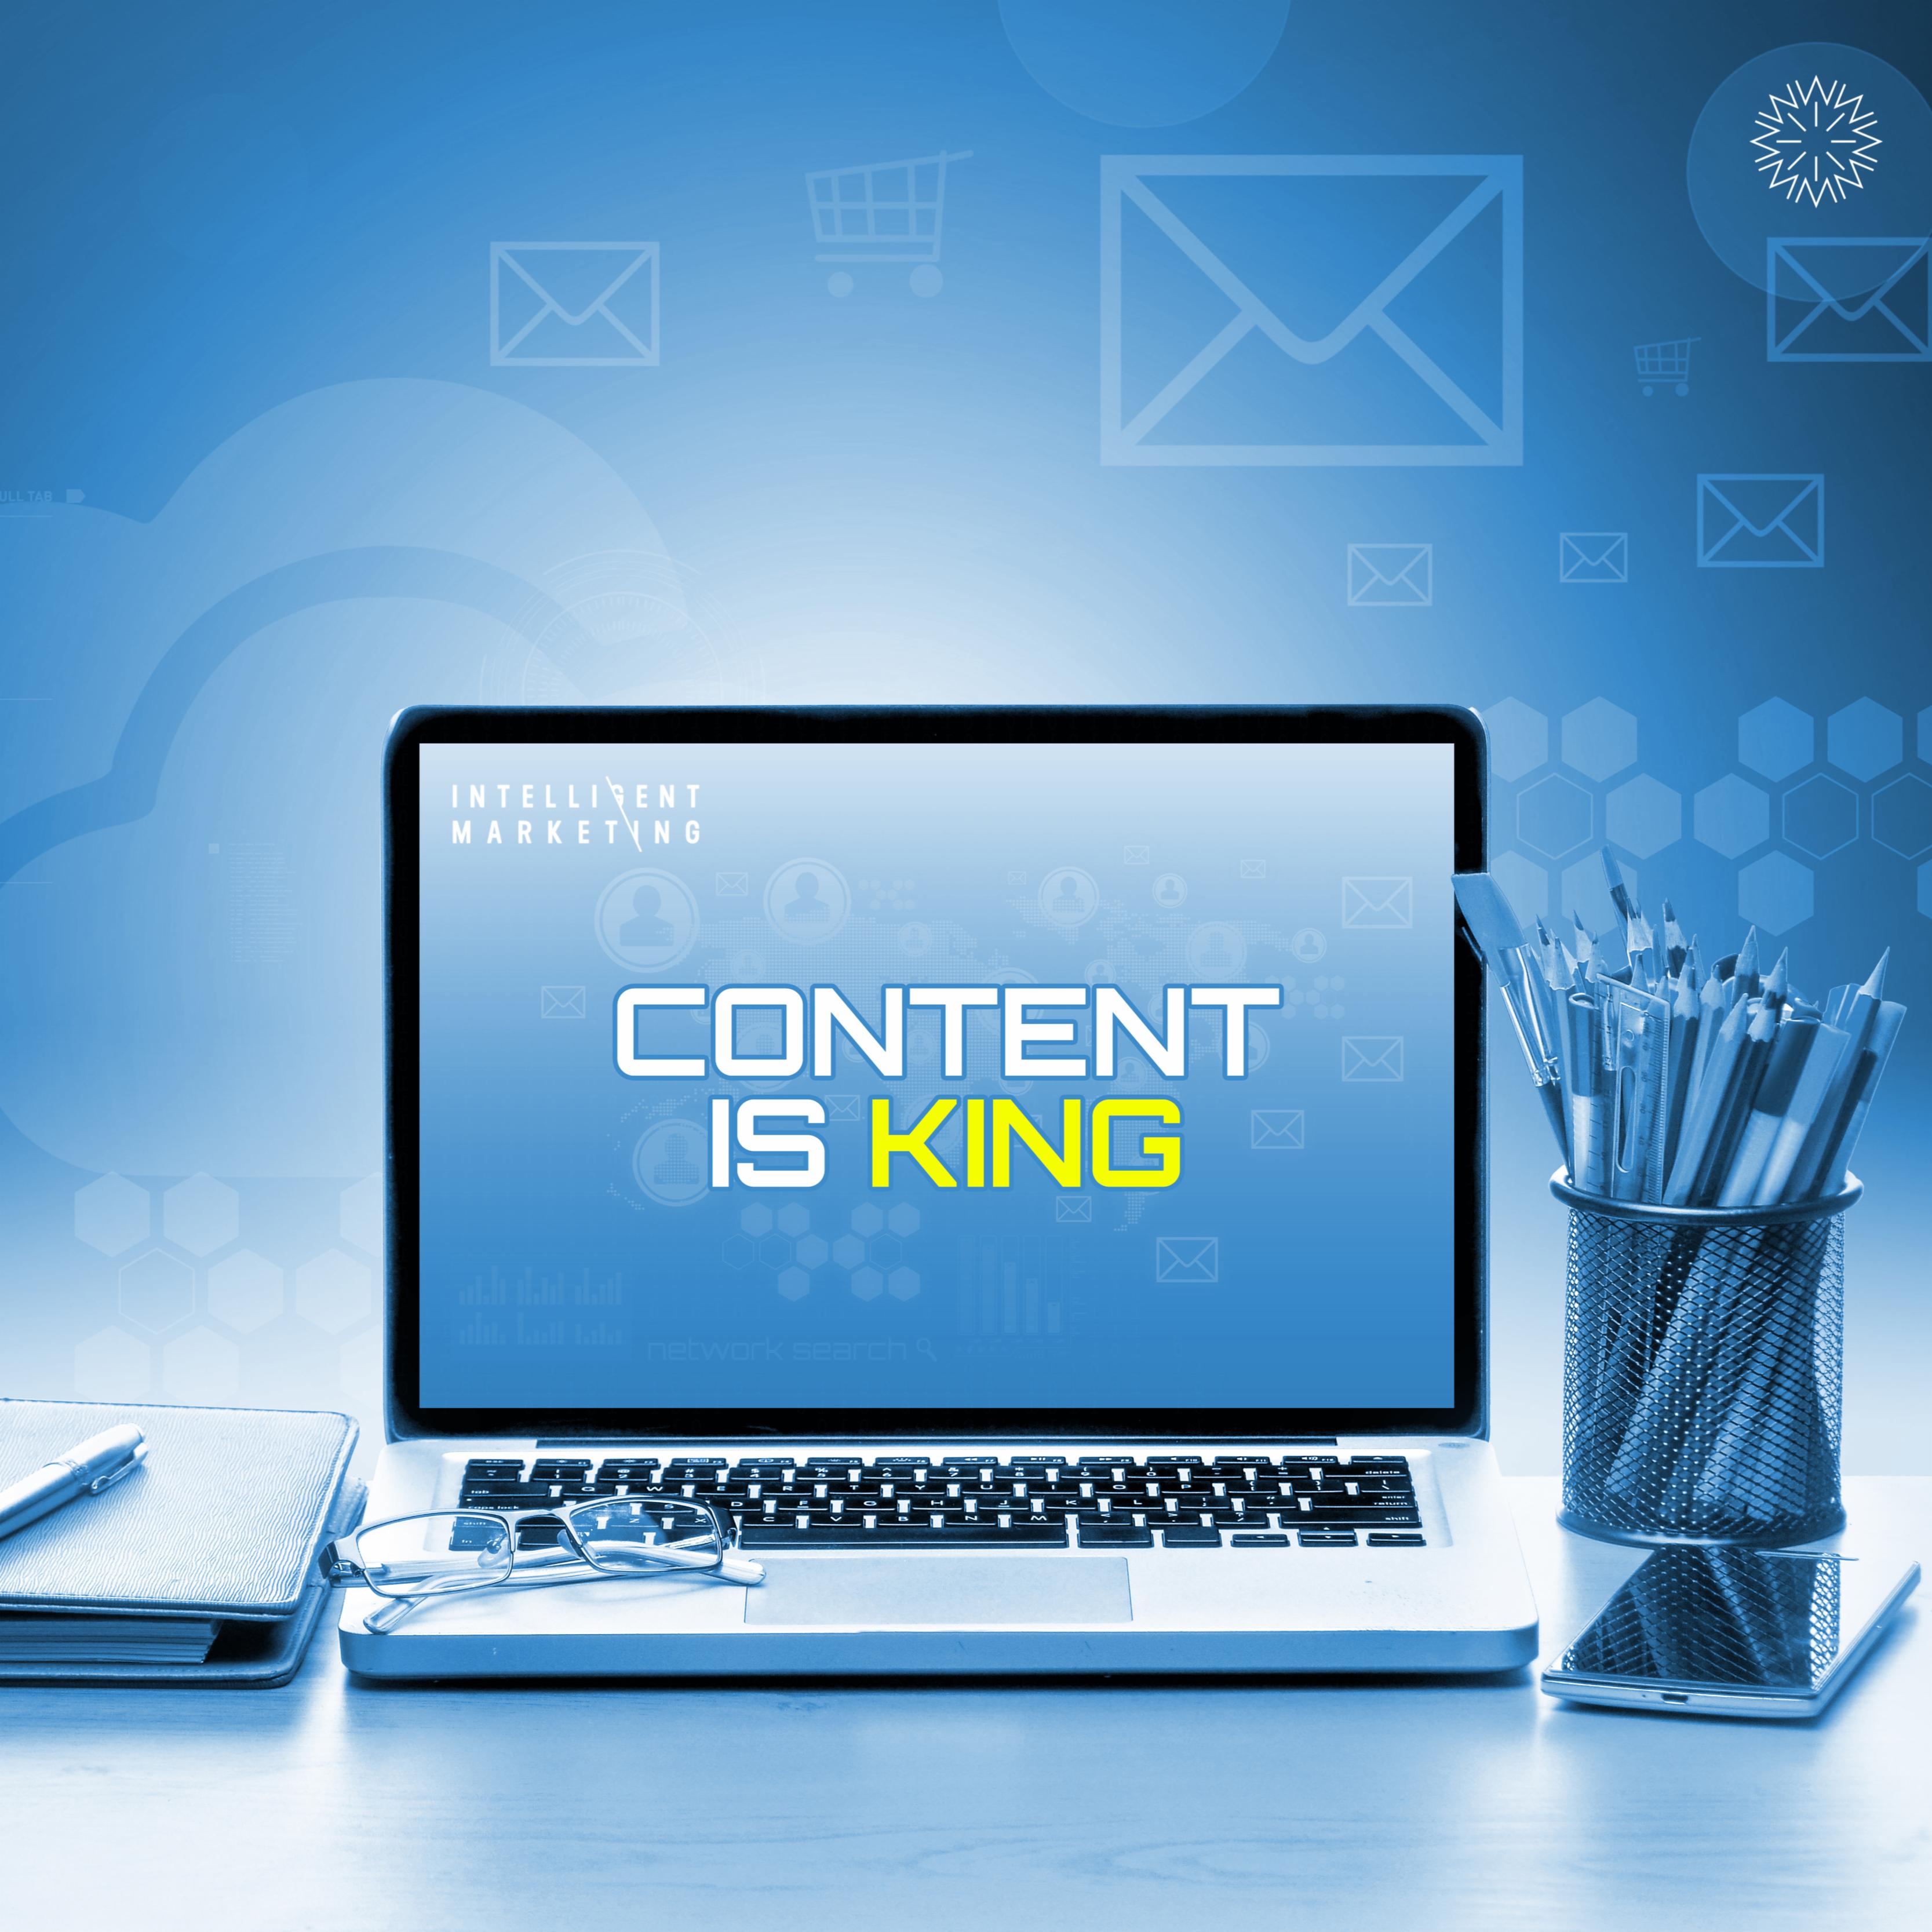 Intelligent Marketing Content is King